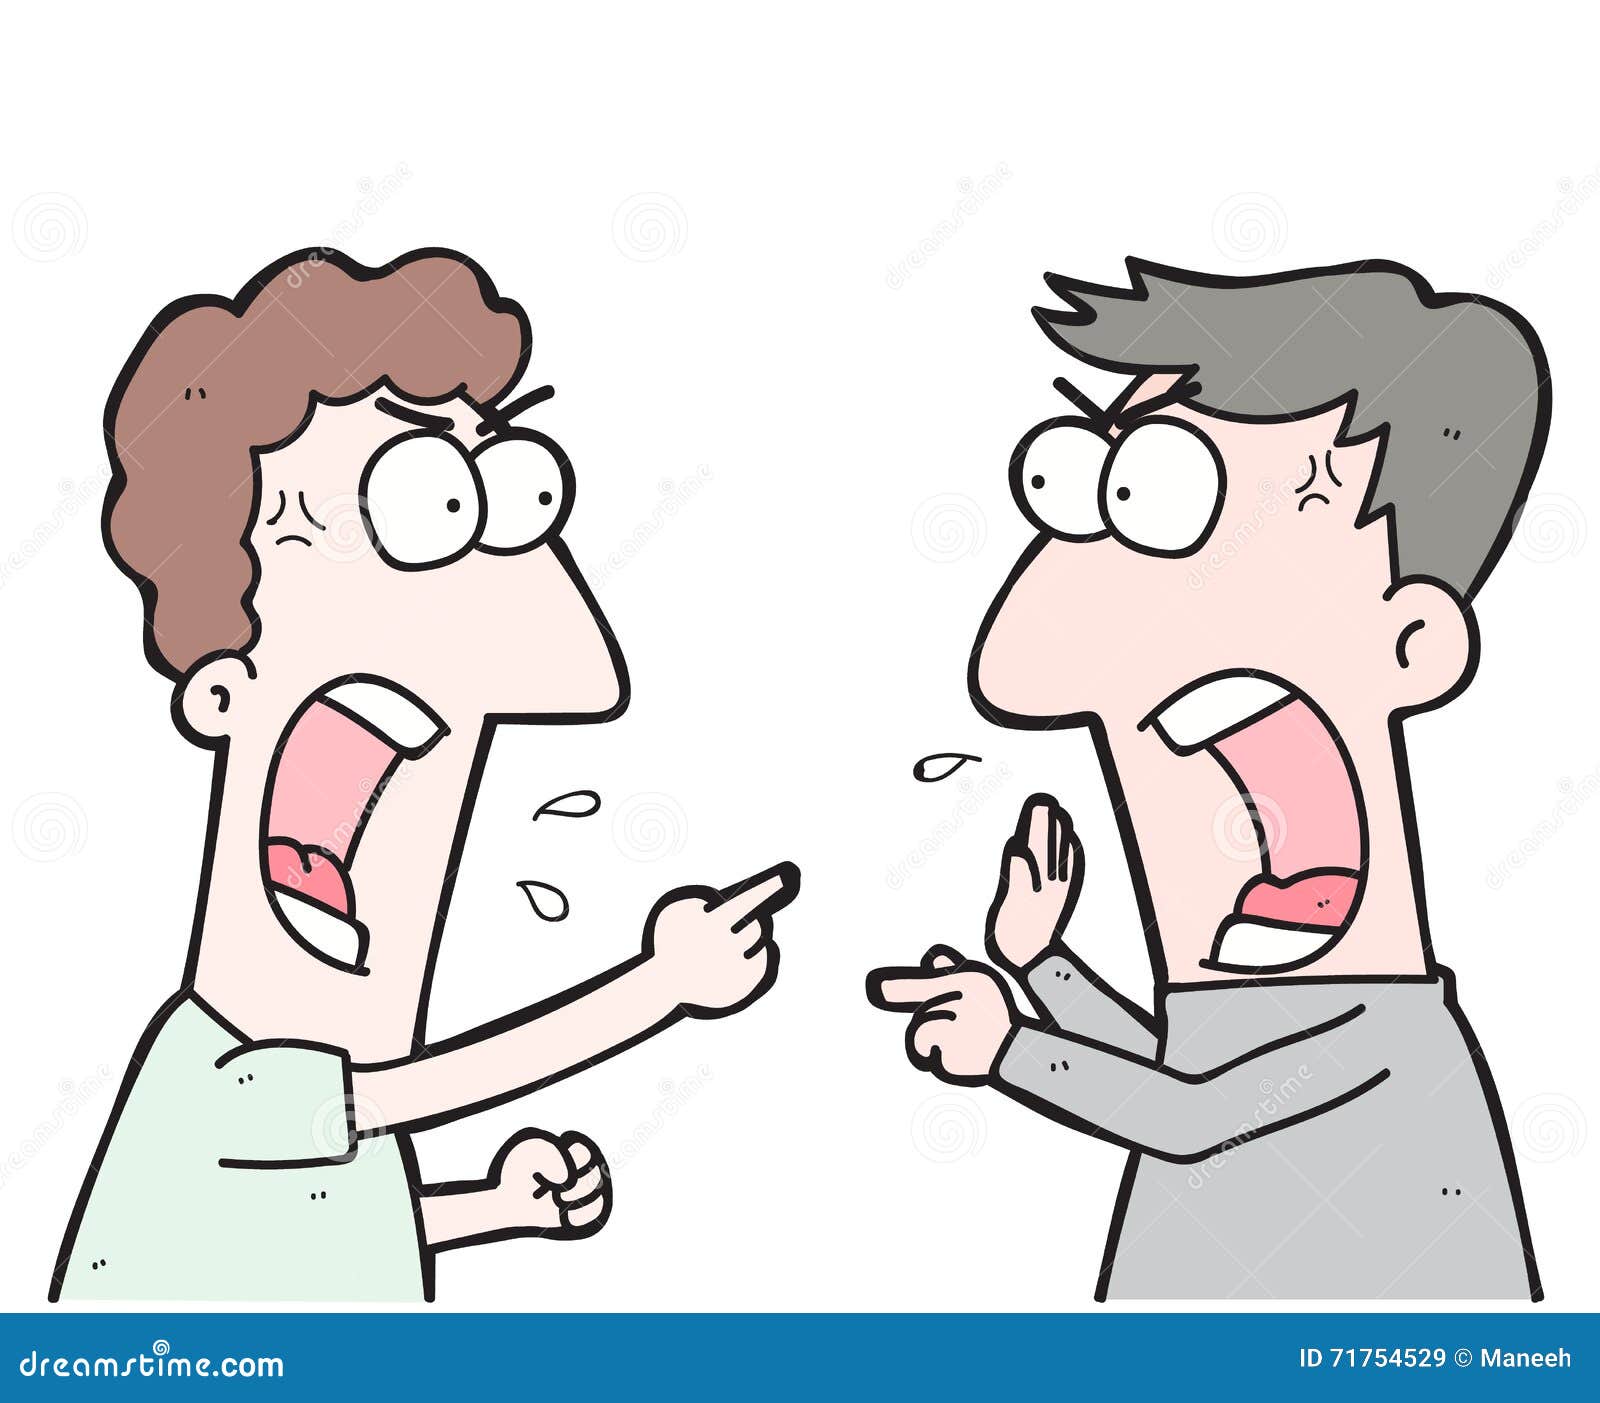 cartoon two people arguing